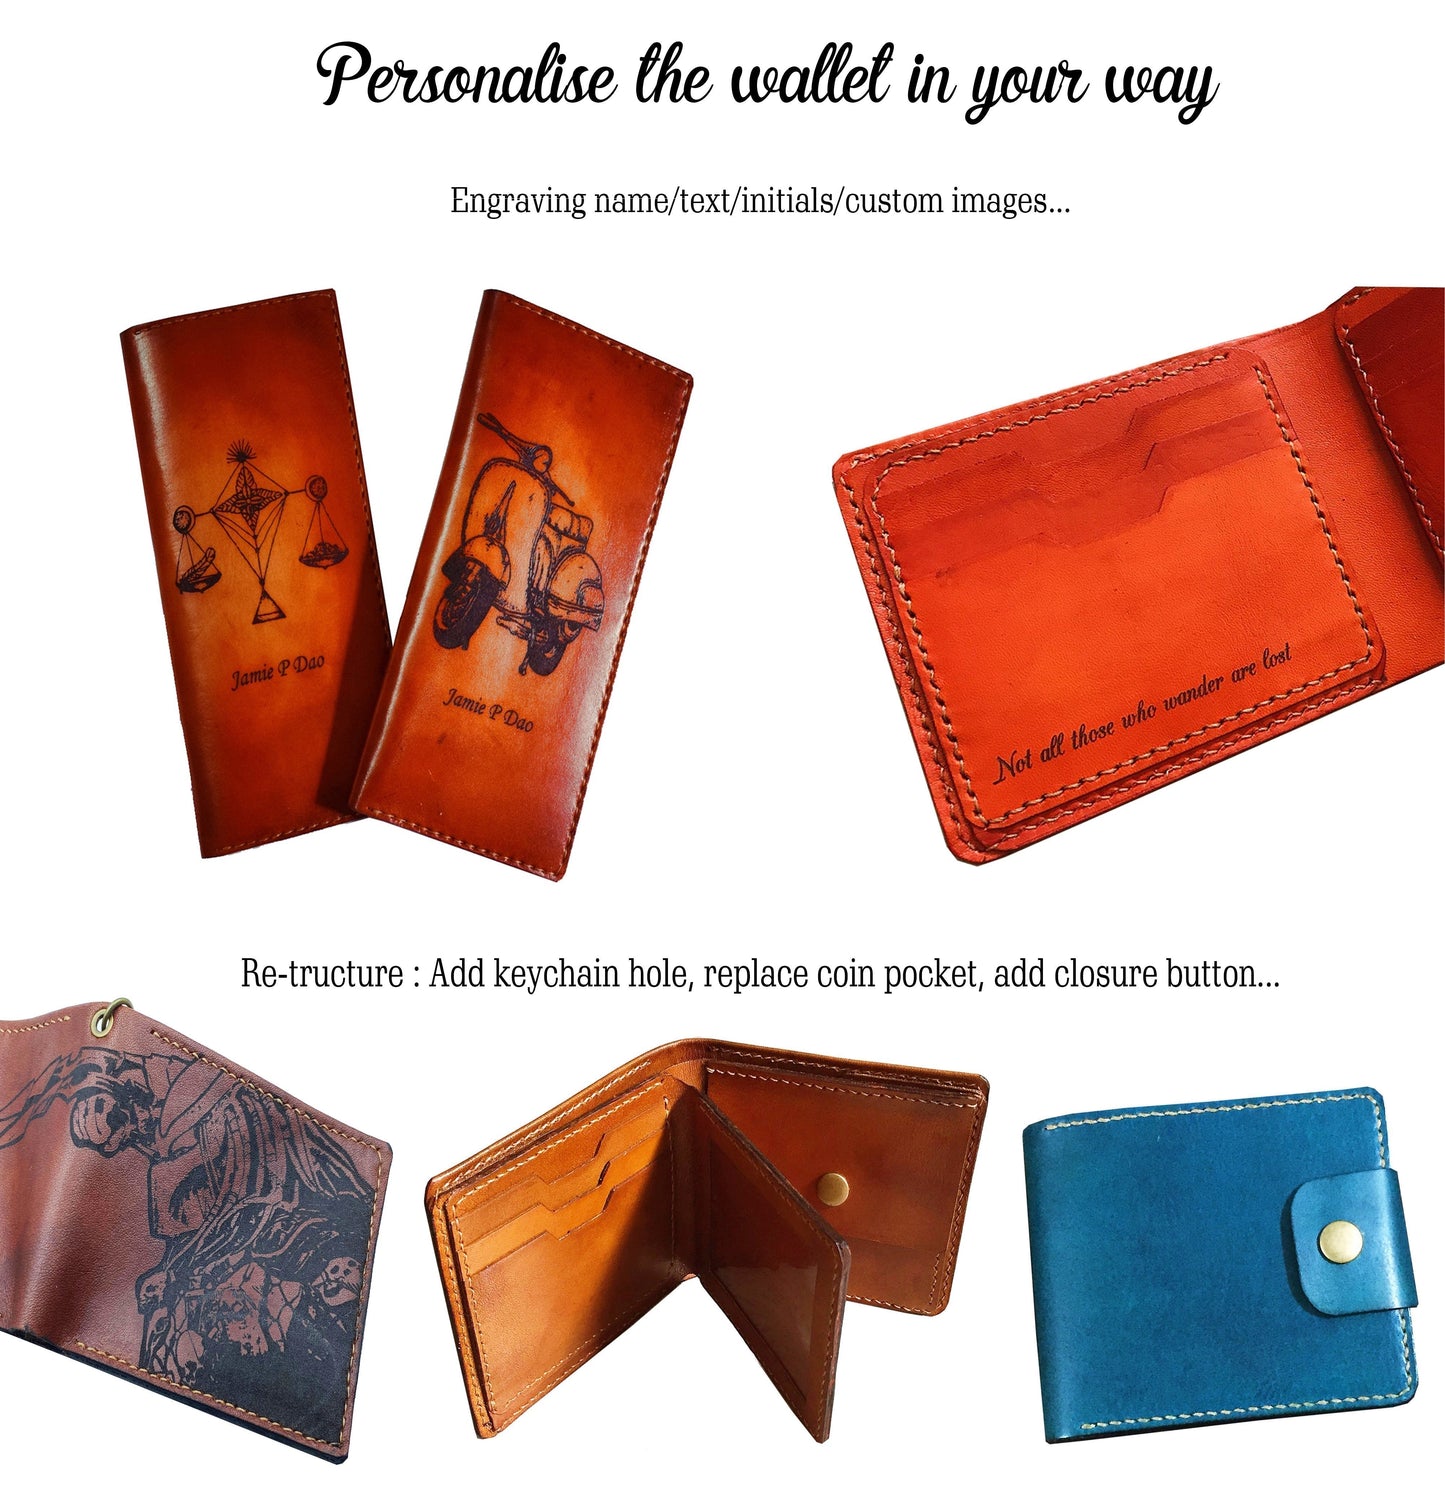 Mayan Corner - Personalized genuine leather handmade wallet, leather gift ideas for him, ninja turtle leather art wallet - 0111221